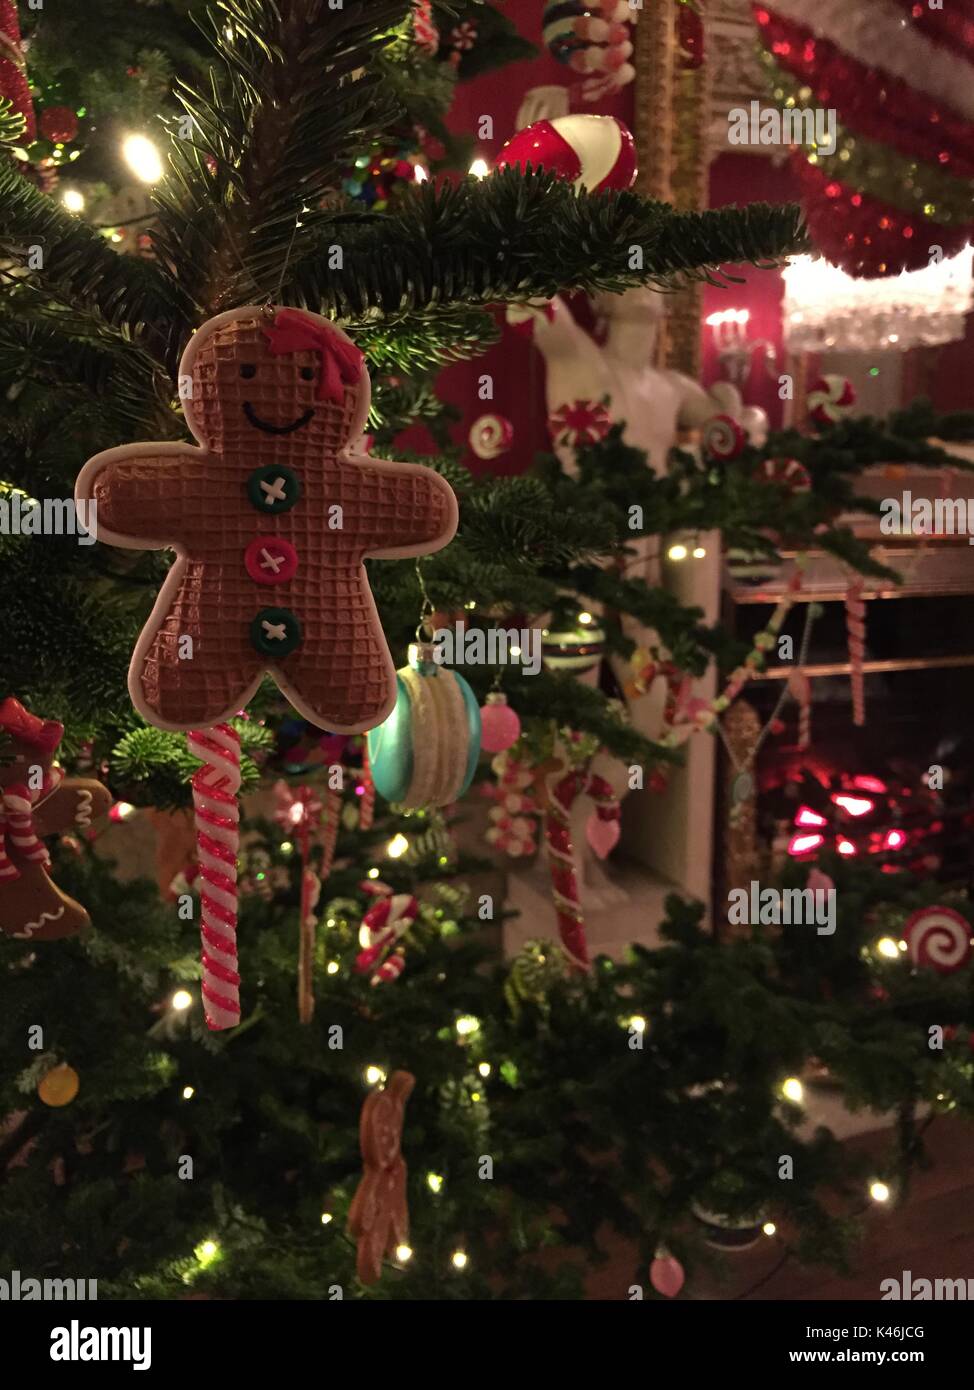 Gingerbread man decoration hangs from a traditional Christmas tree Stock Photo